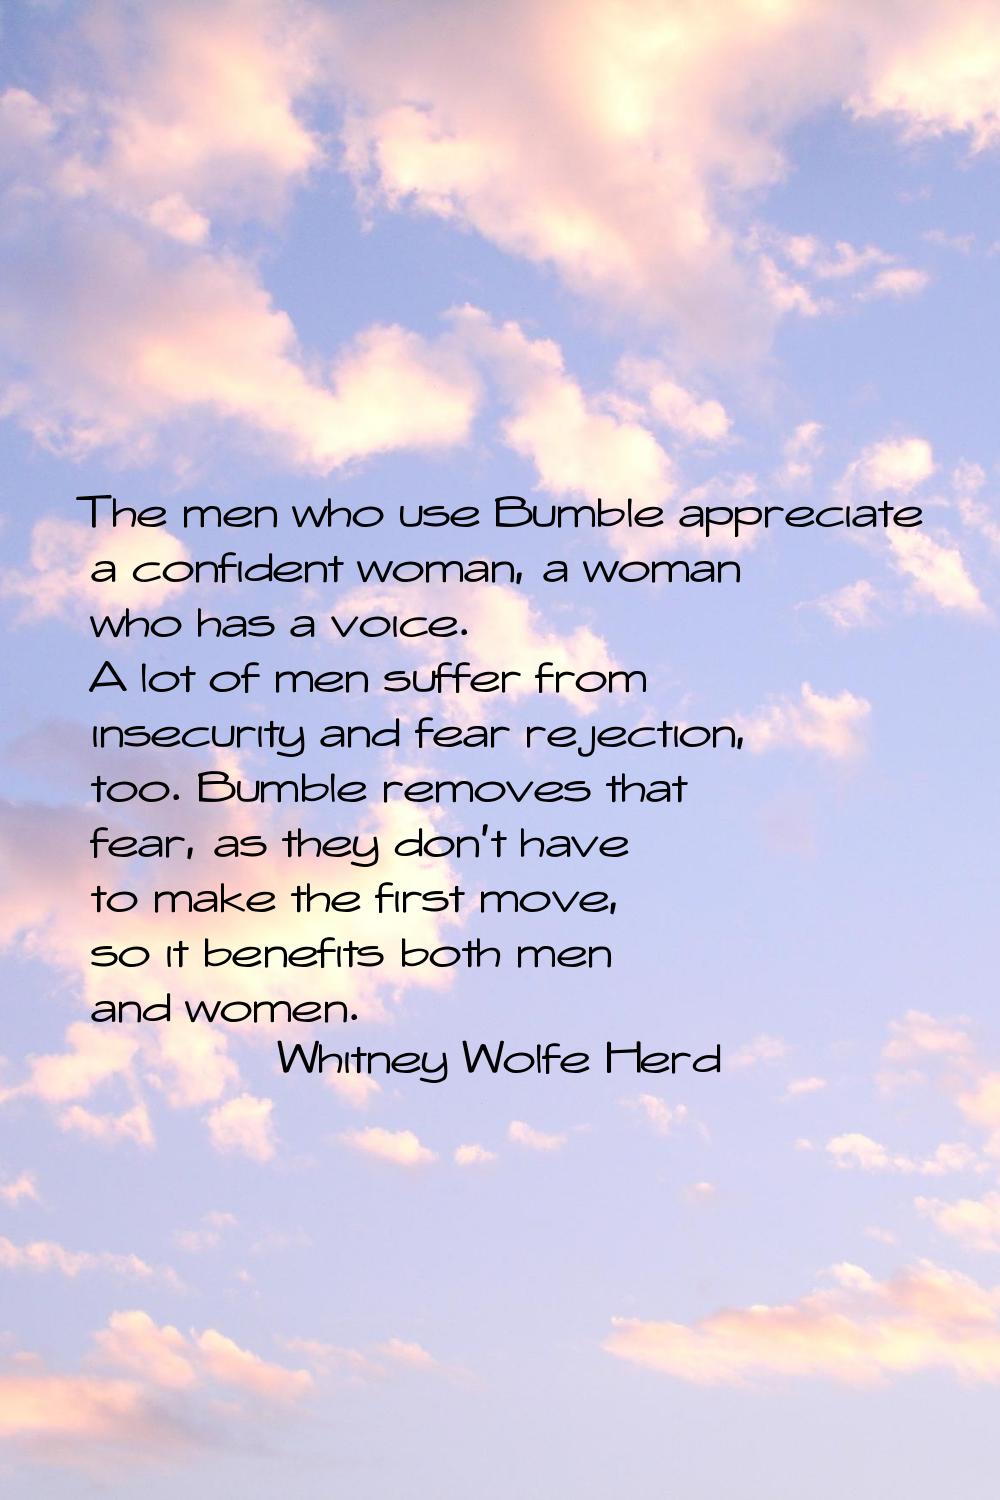 The men who use Bumble appreciate a confident woman, a woman who has a voice. A lot of men suffer f